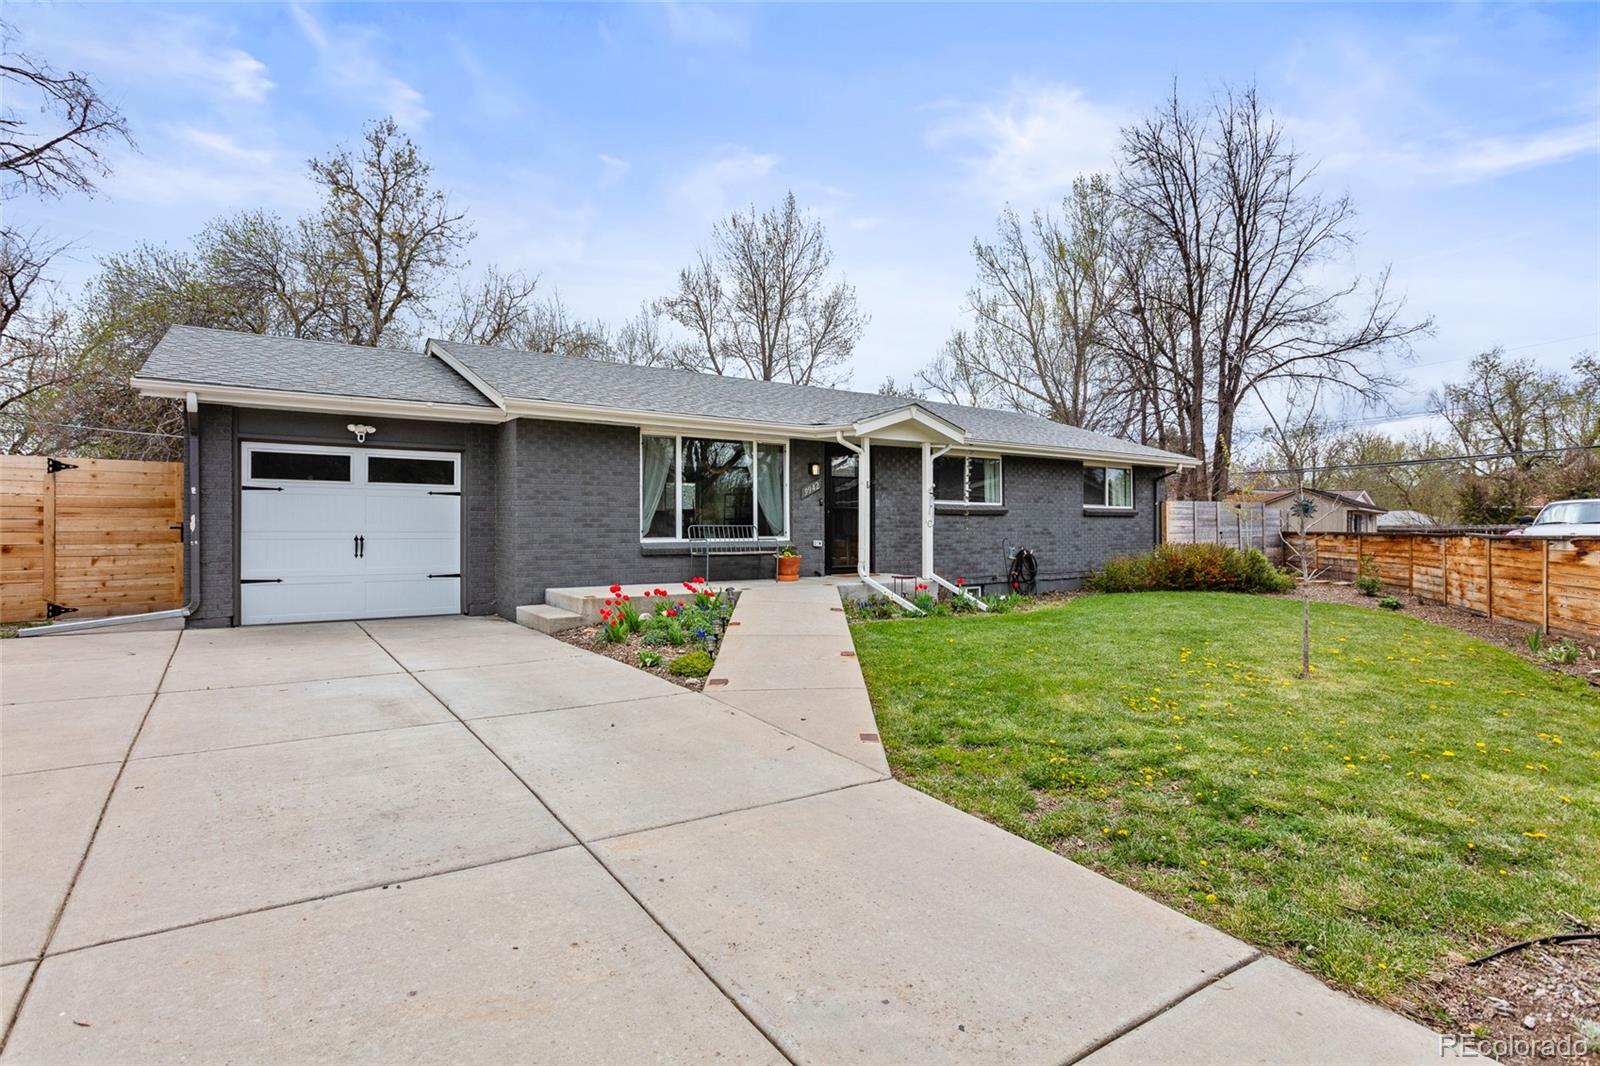 9942 W 66th Place, arvada MLS: 3412104 Beds: 5 Baths: 3 Price: $749,900